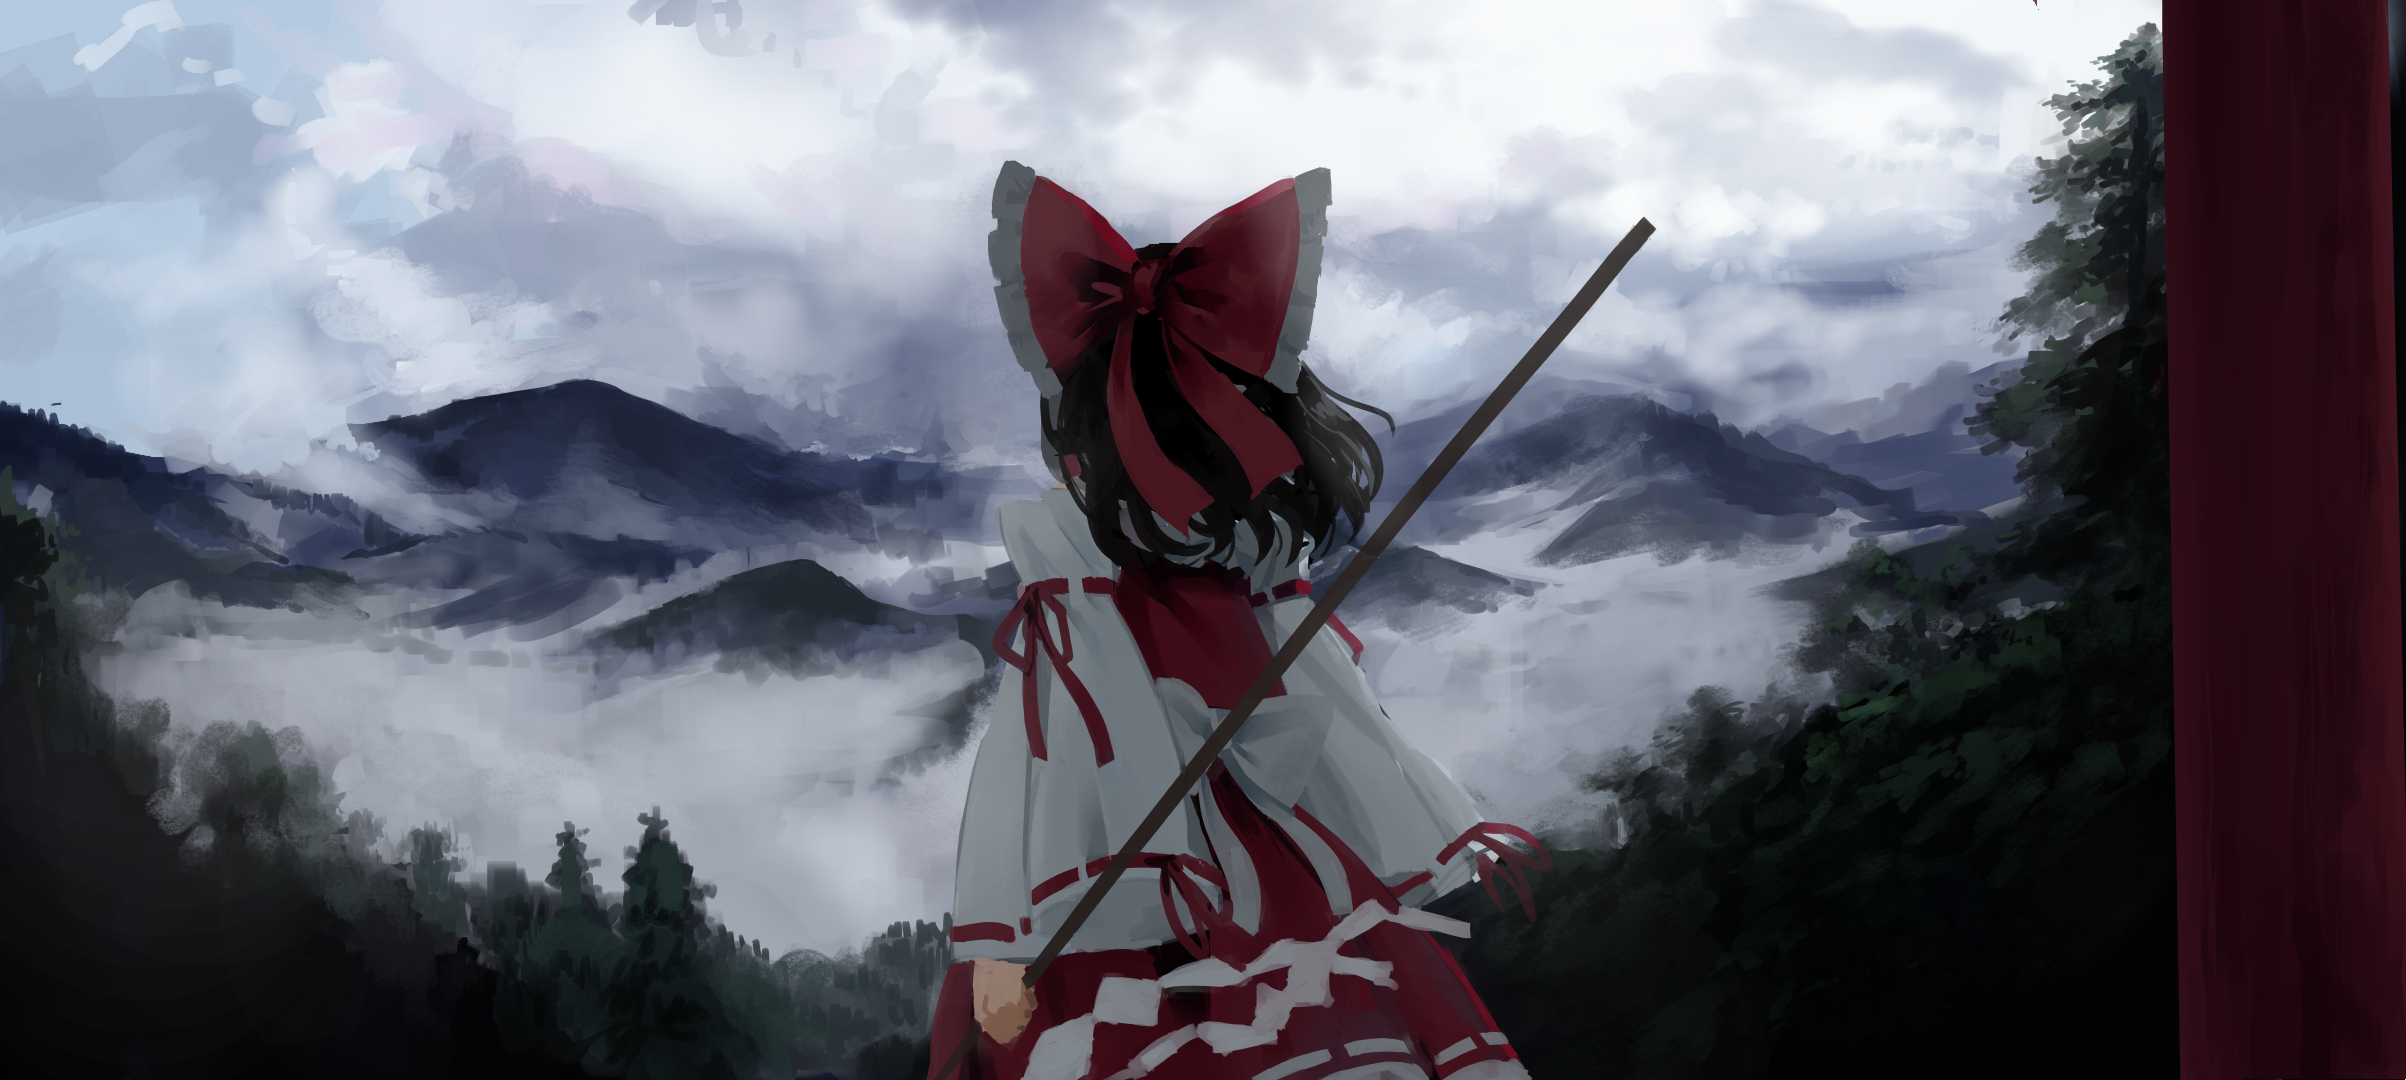 Hakurei Reimu Touhou Anime Girls Mountains Red Bow Shrine Maidens Overcast Forest Looking Into The D 2406x1080